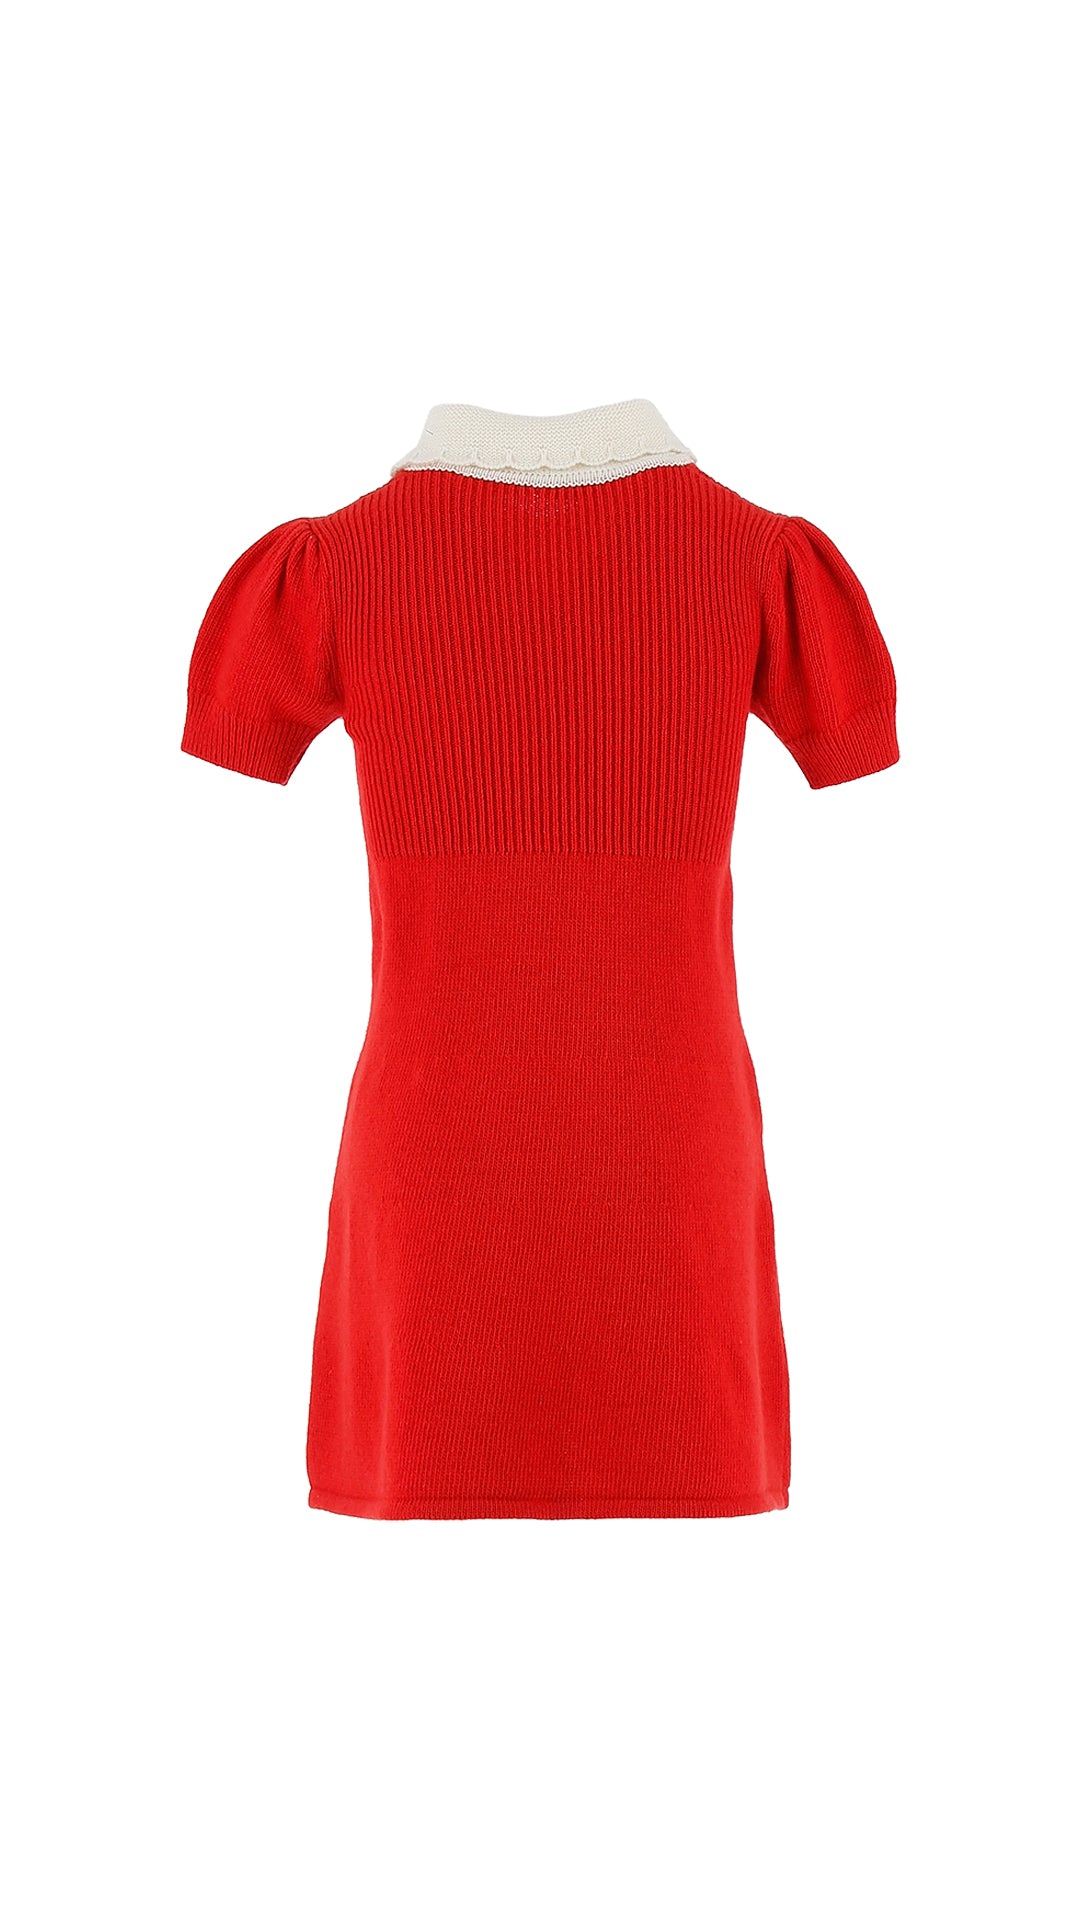 Philosophy SS Knit Dress w/ Bow Detail   Red-White 5Y